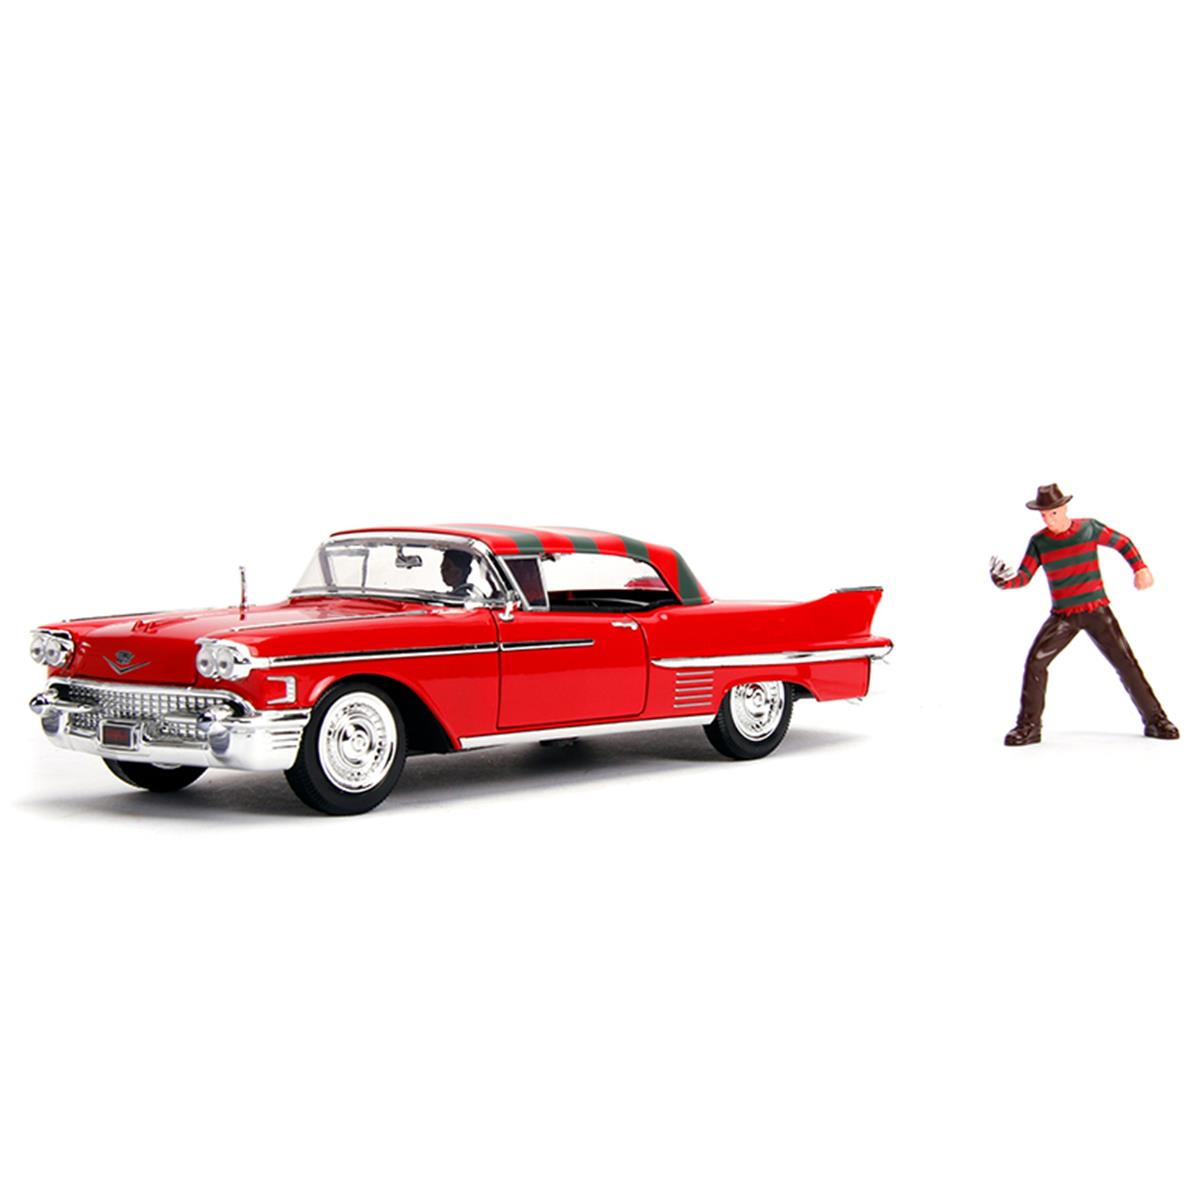 1 By 24 Scale A Nightmare On Elm Street Car For 1958 Cadillac Series 62 With Freddy Krueger, Red